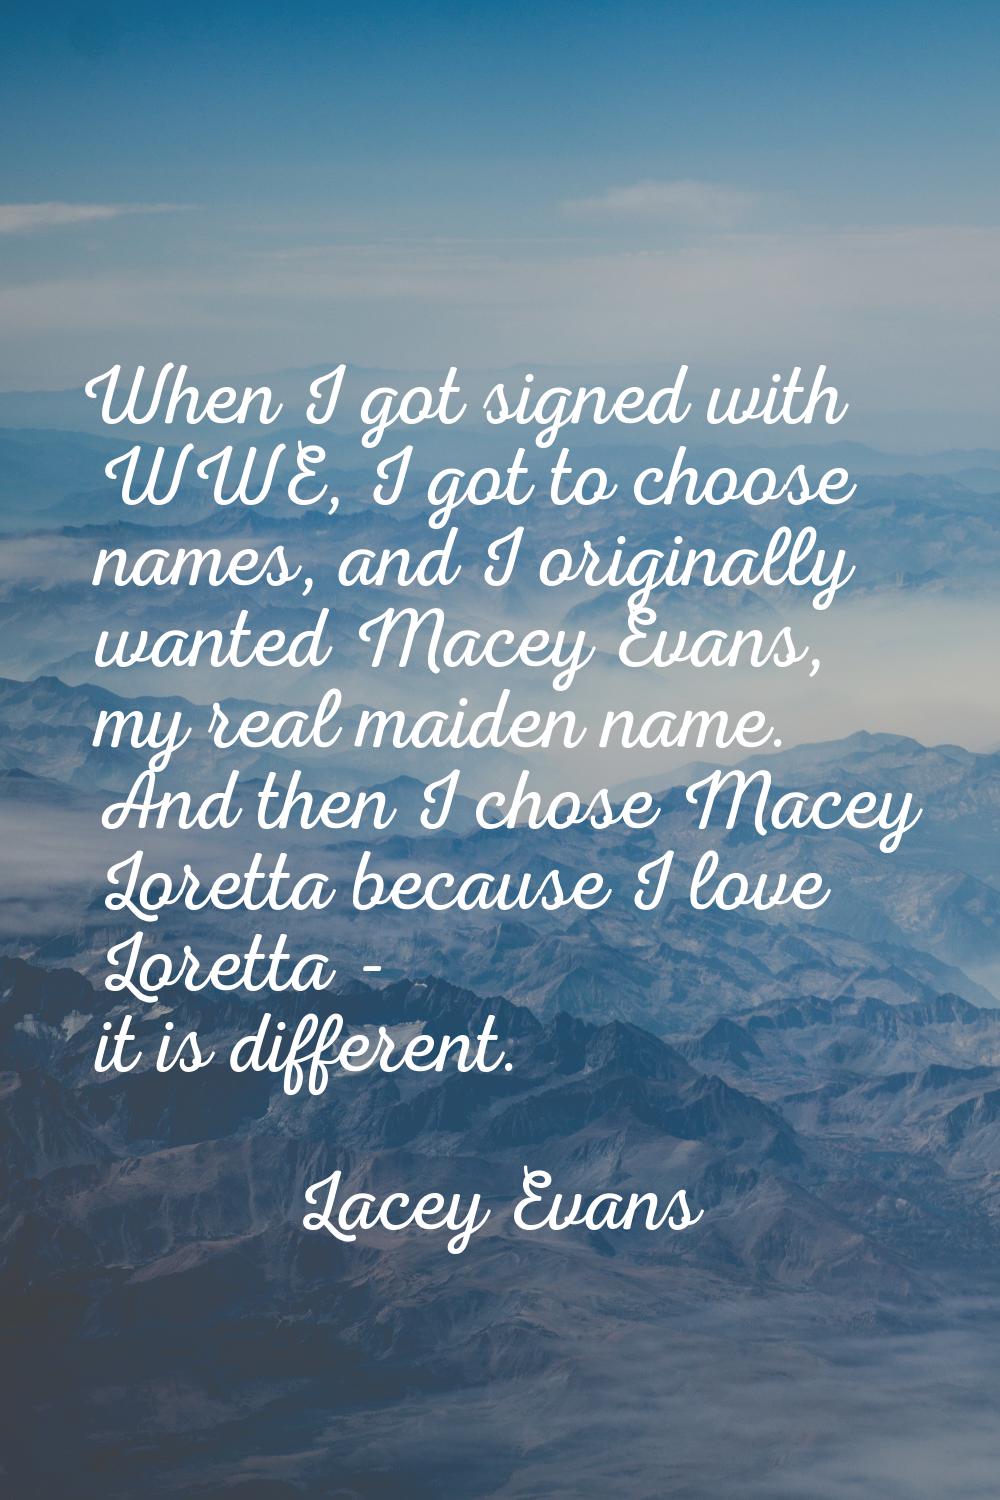 When I got signed with WWE, I got to choose names, and I originally wanted Macey Evans, my real mai